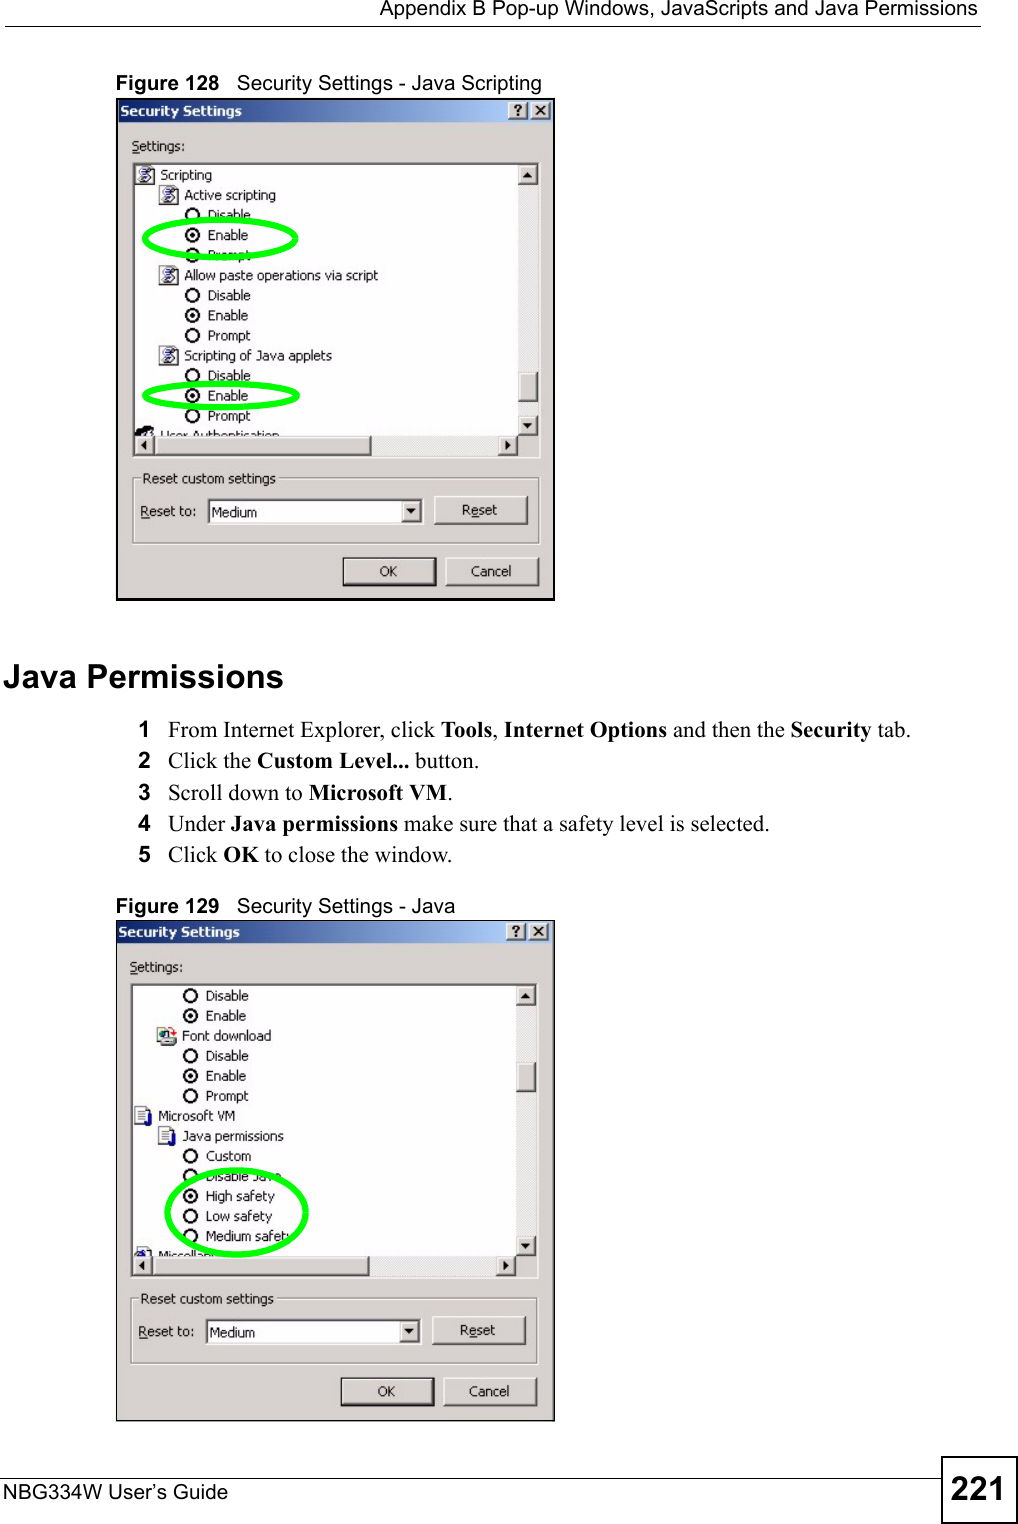  Appendix B Pop-up Windows, JavaScripts and Java PermissionsNBG334W User’s Guide 221Figure 128   Security Settings - Java ScriptingJava Permissions1From Internet Explorer, click Tools, Internet Options and then the Security tab. 2Click the Custom Level... button. 3Scroll down to Microsoft VM. 4Under Java permissions make sure that a safety level is selected.5Click OK to close the window.Figure 129   Security Settings - Java 